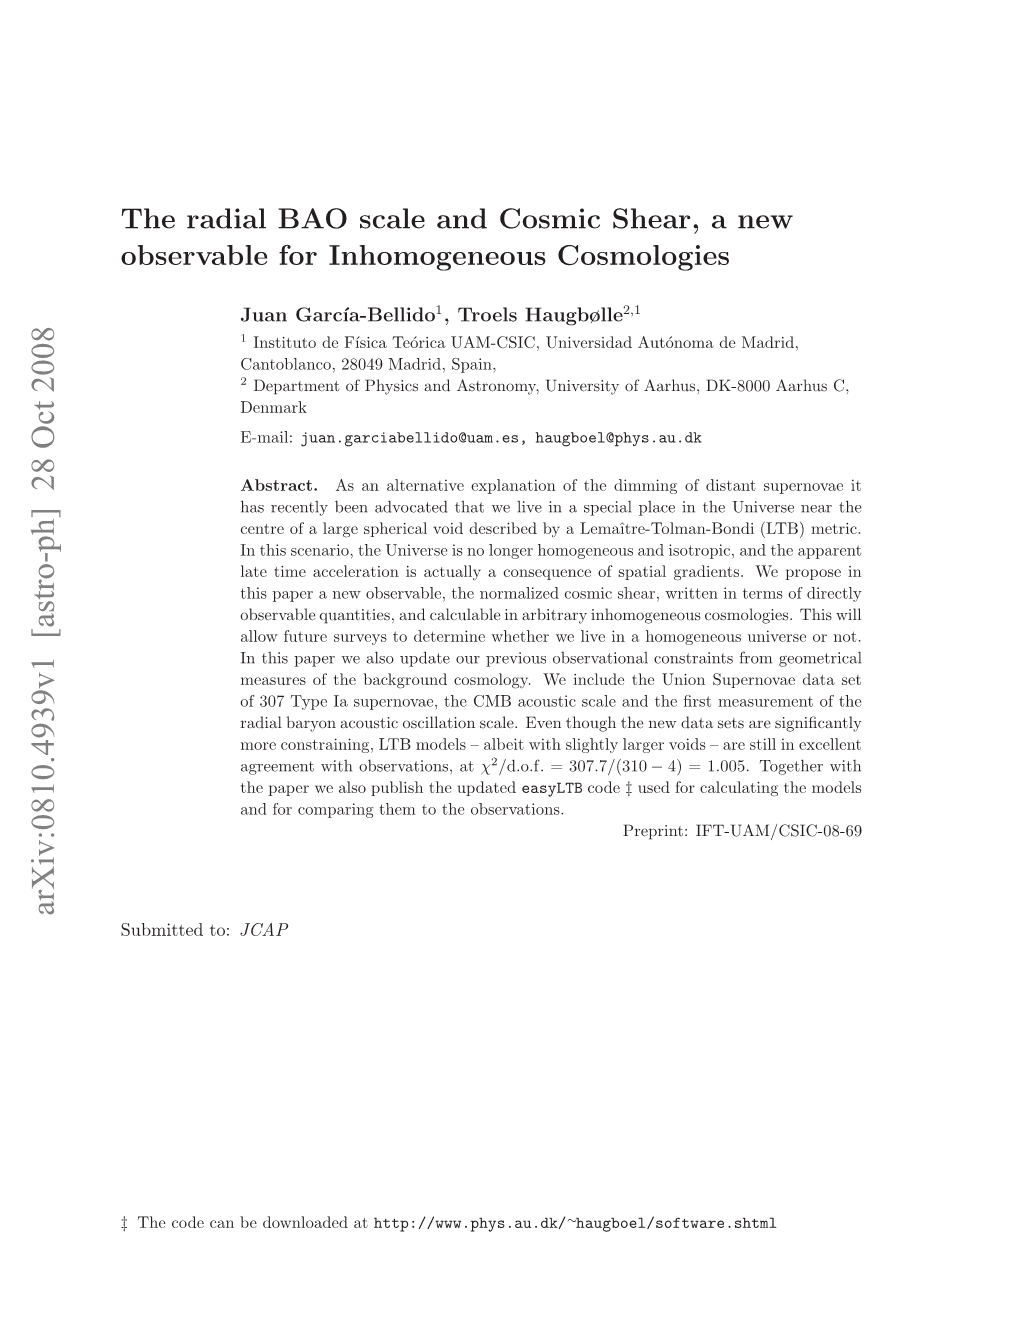 The Radial BAO Scale and Cosmic Shear, a New Observable for Inhomogeneous Cosmologies2